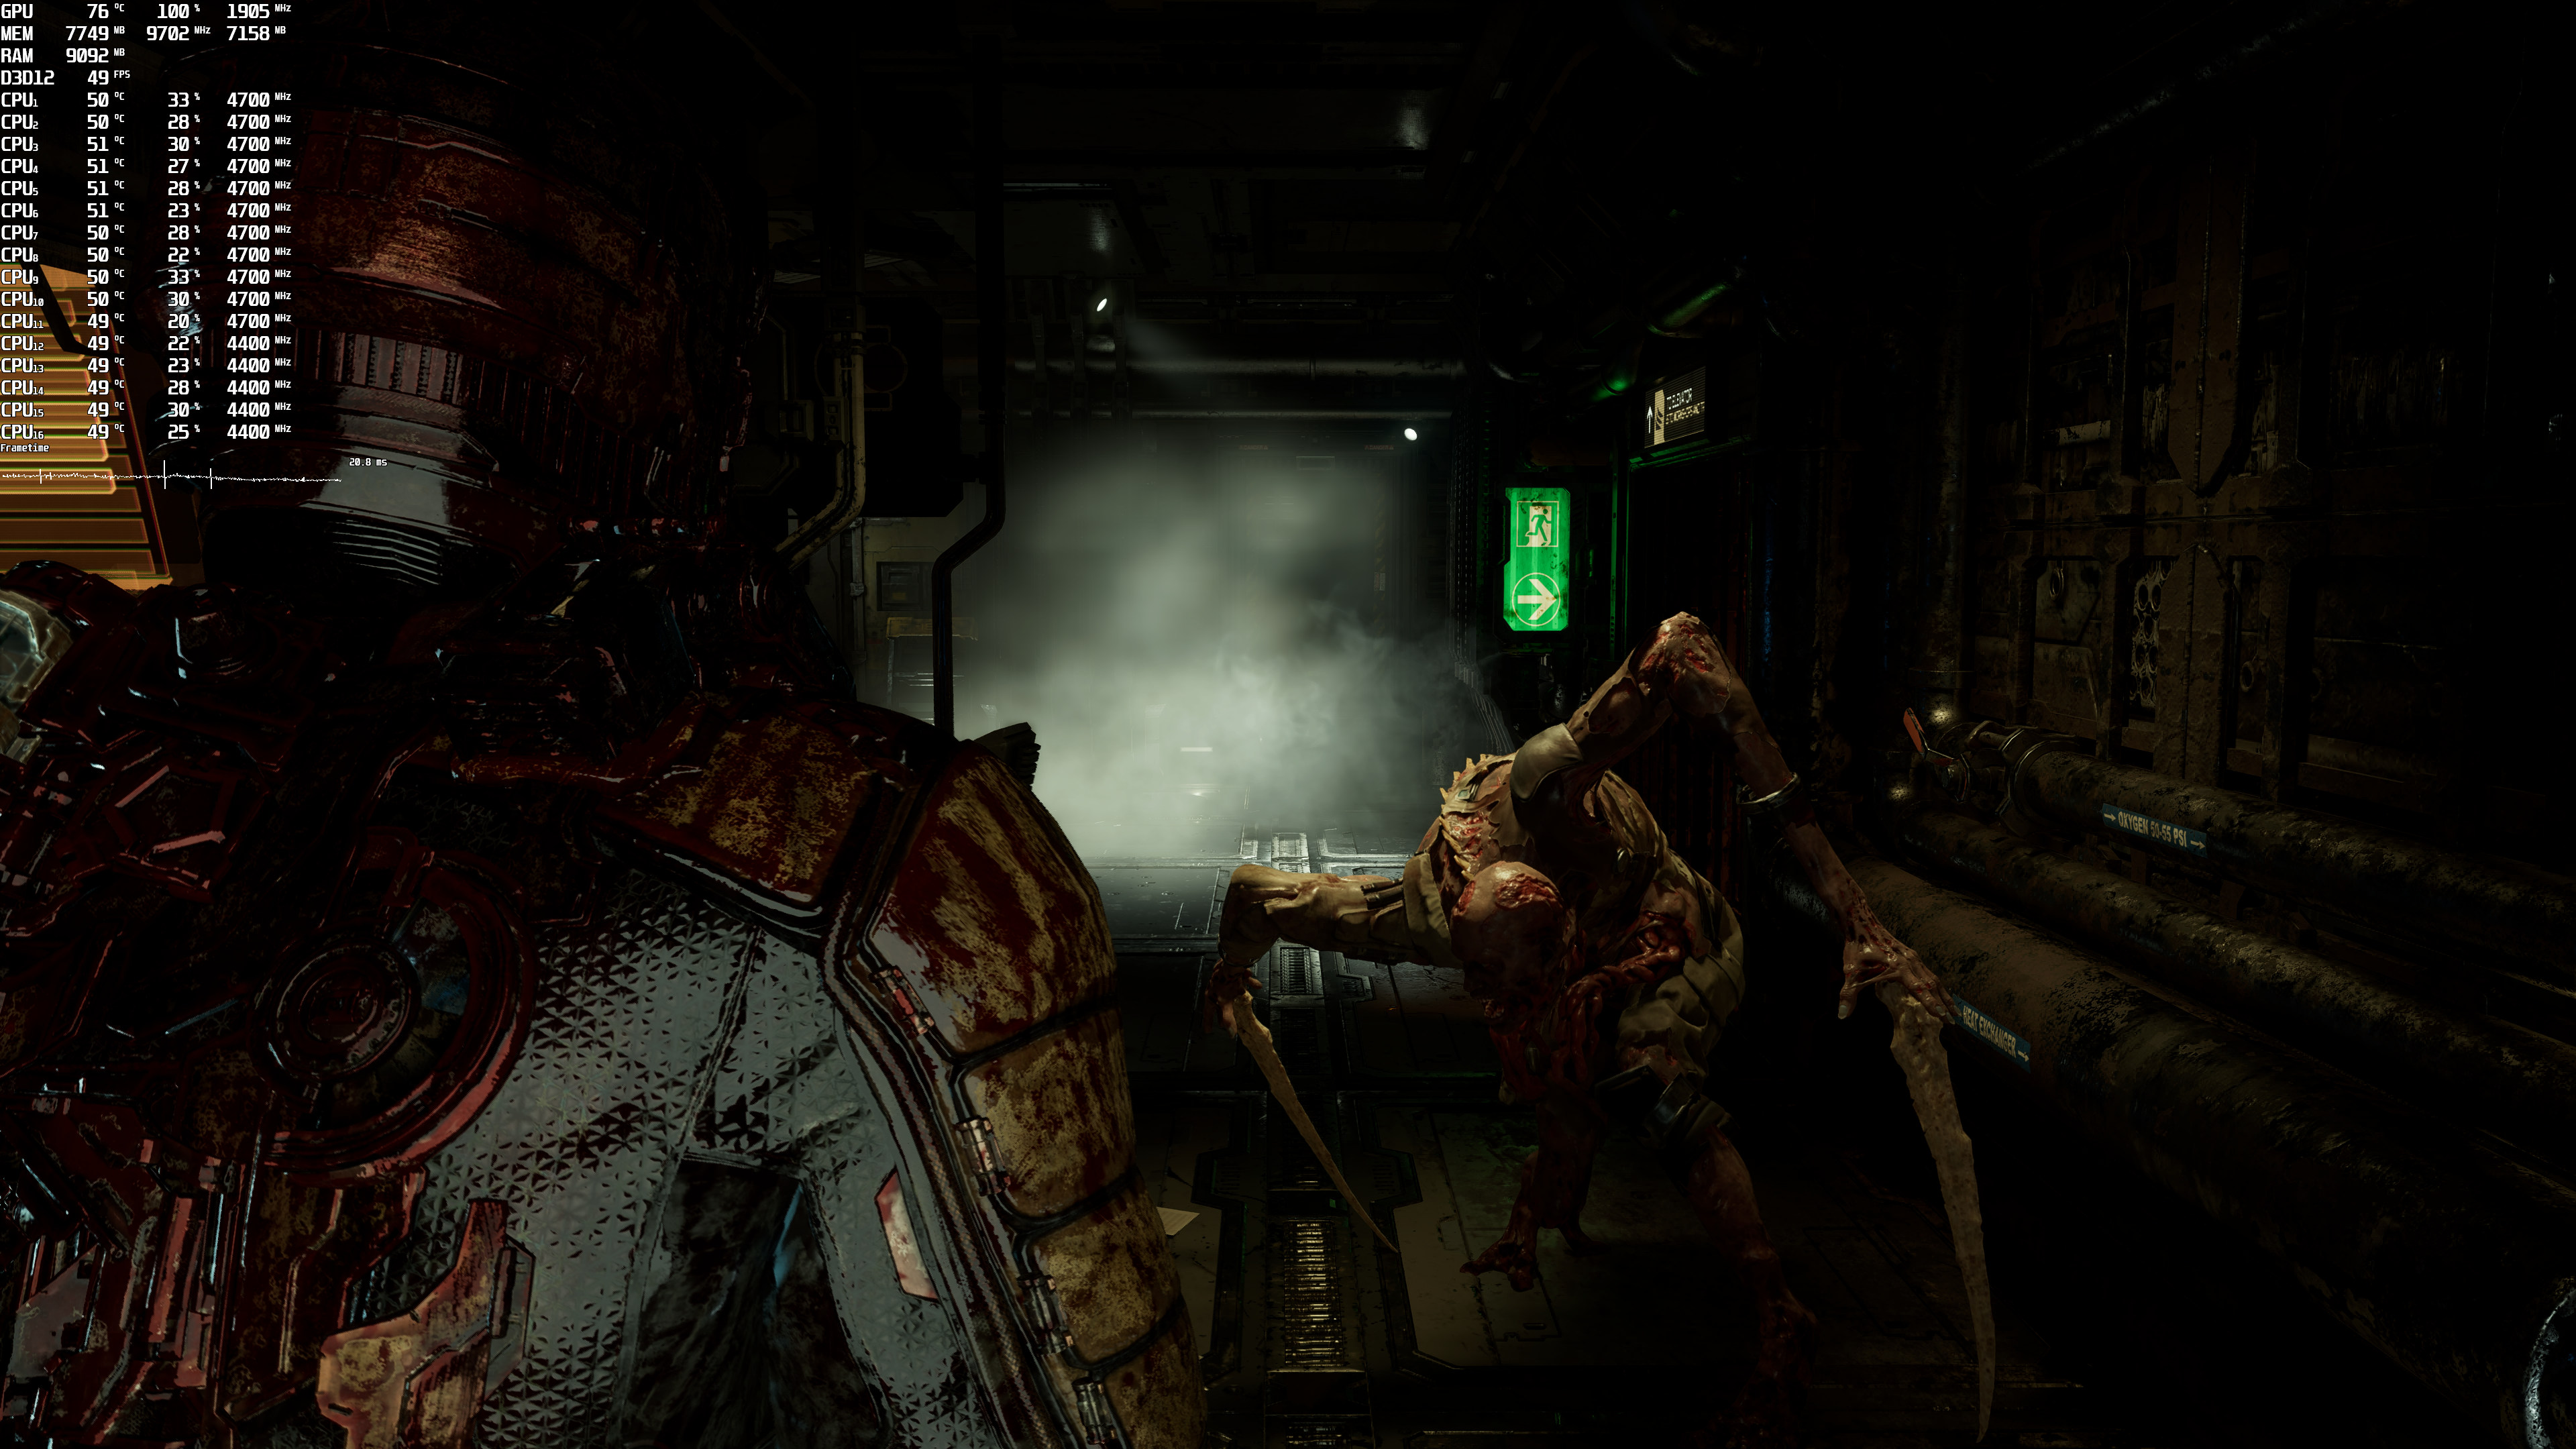 Dead Space Remake Review Round Up: Great Visuals, Smart Changes